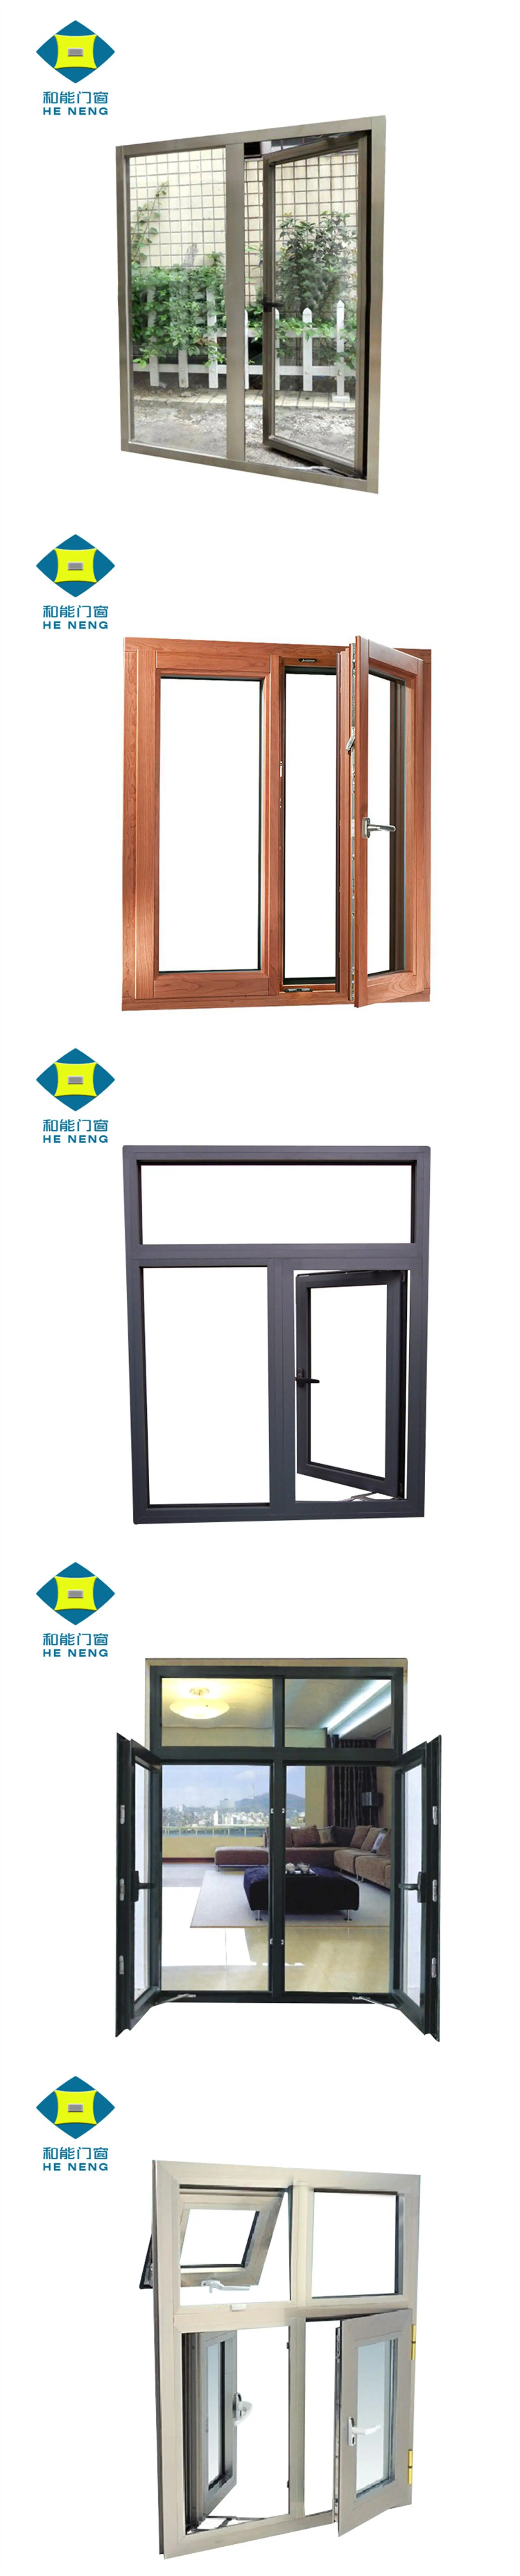 Commercial Guangzhou Aluminum Alloy French Casement window And Doors Frames Price Philippines